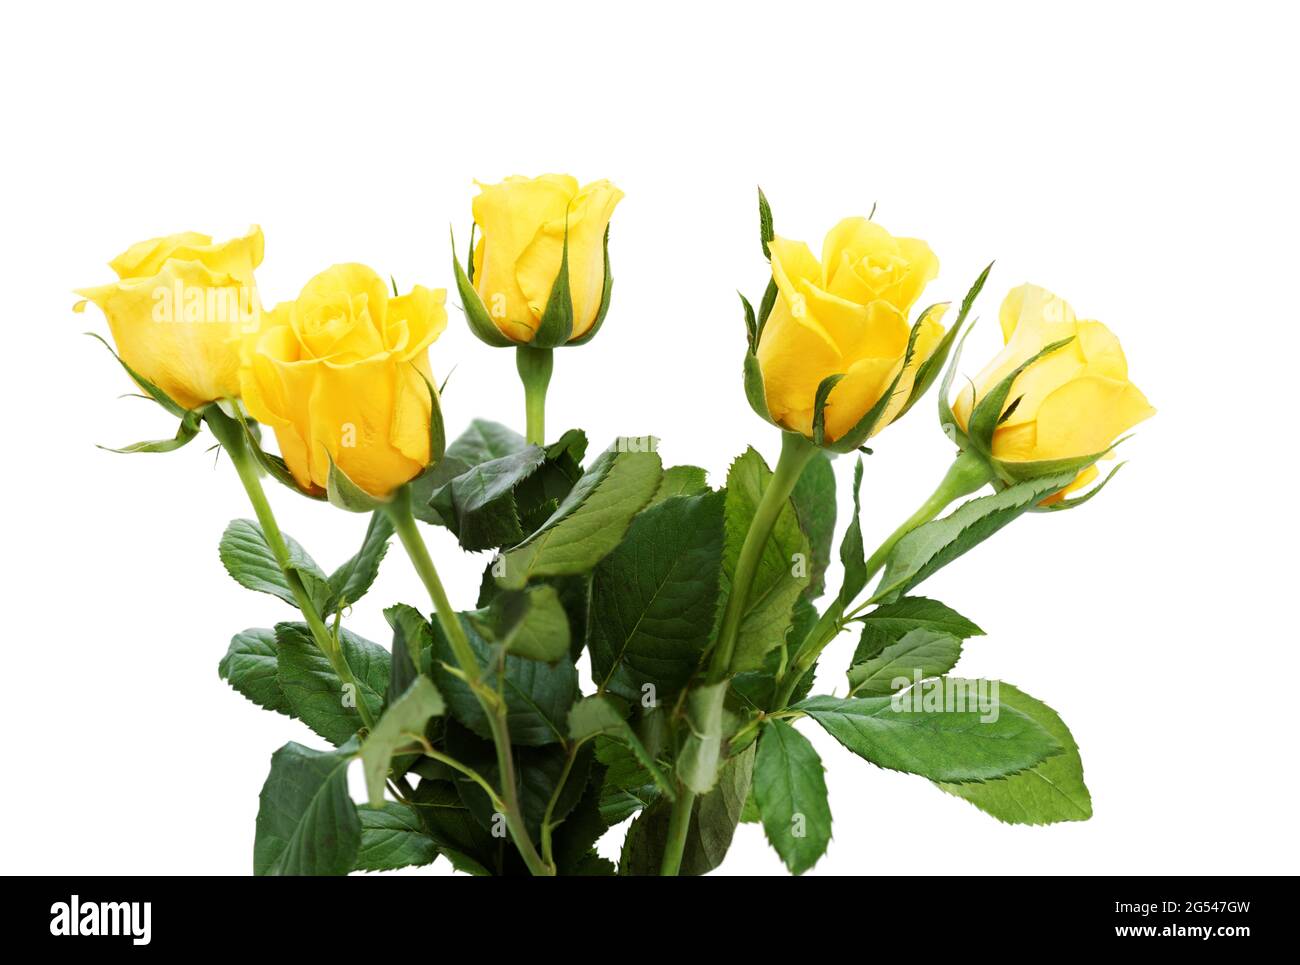 Bouquet of five yellow roses with green leaves isolated on white Stock Photo